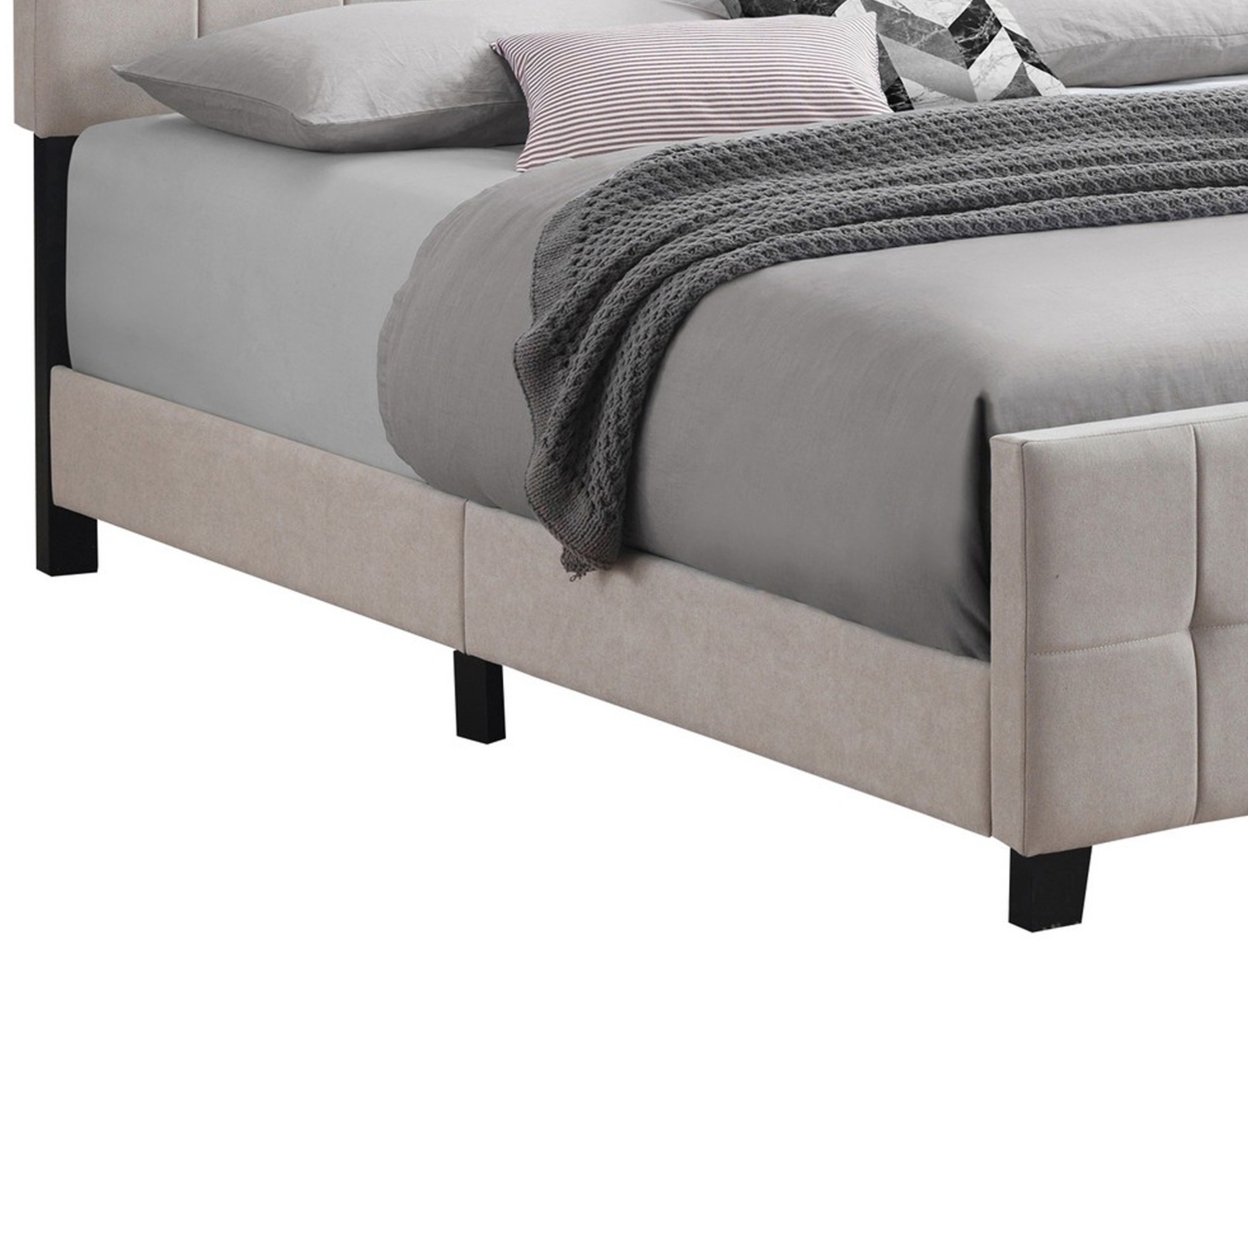 Feny King Bed, Light Gray Fabric Upholstered, Stitched Grid Design